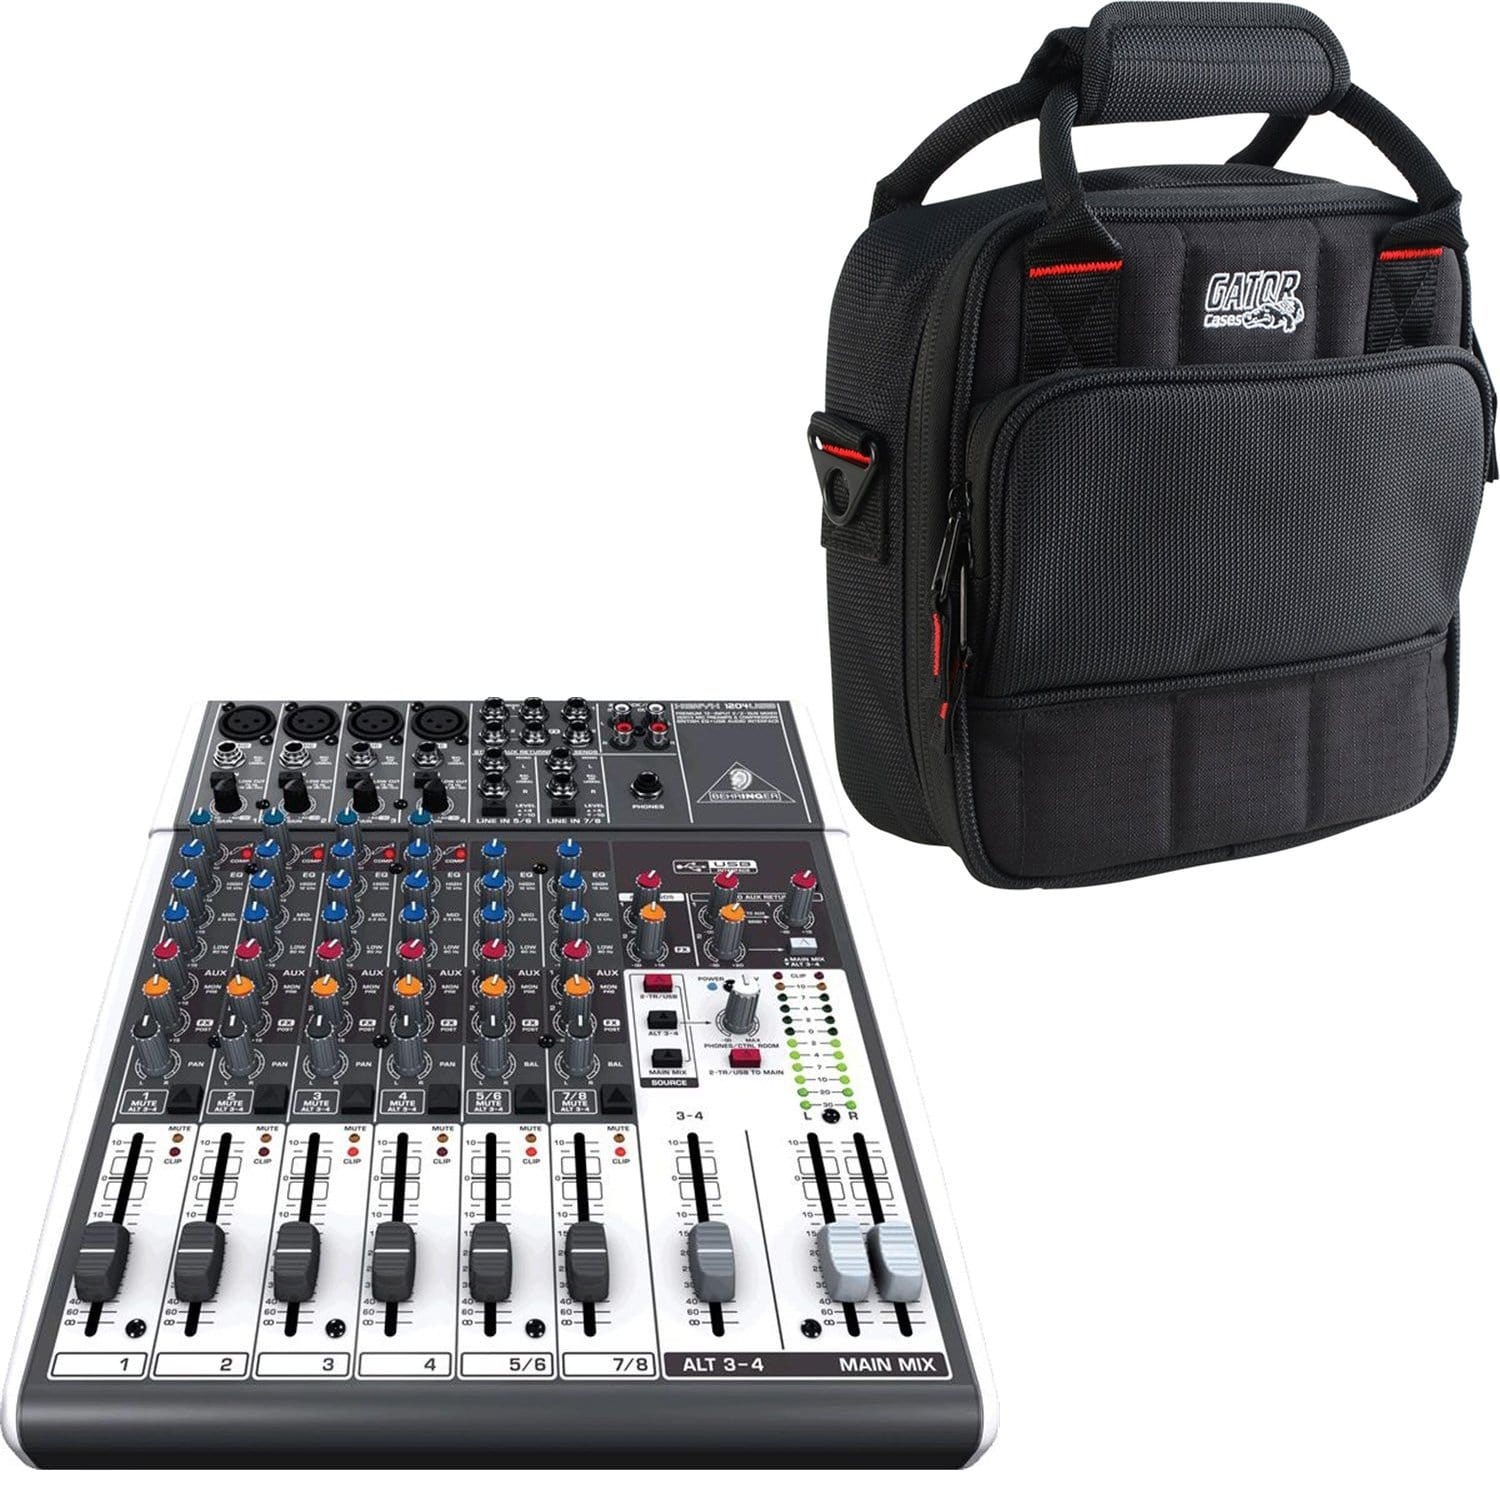 Behringer Xenyx USB 8 Channel Mixer with Gator Bag